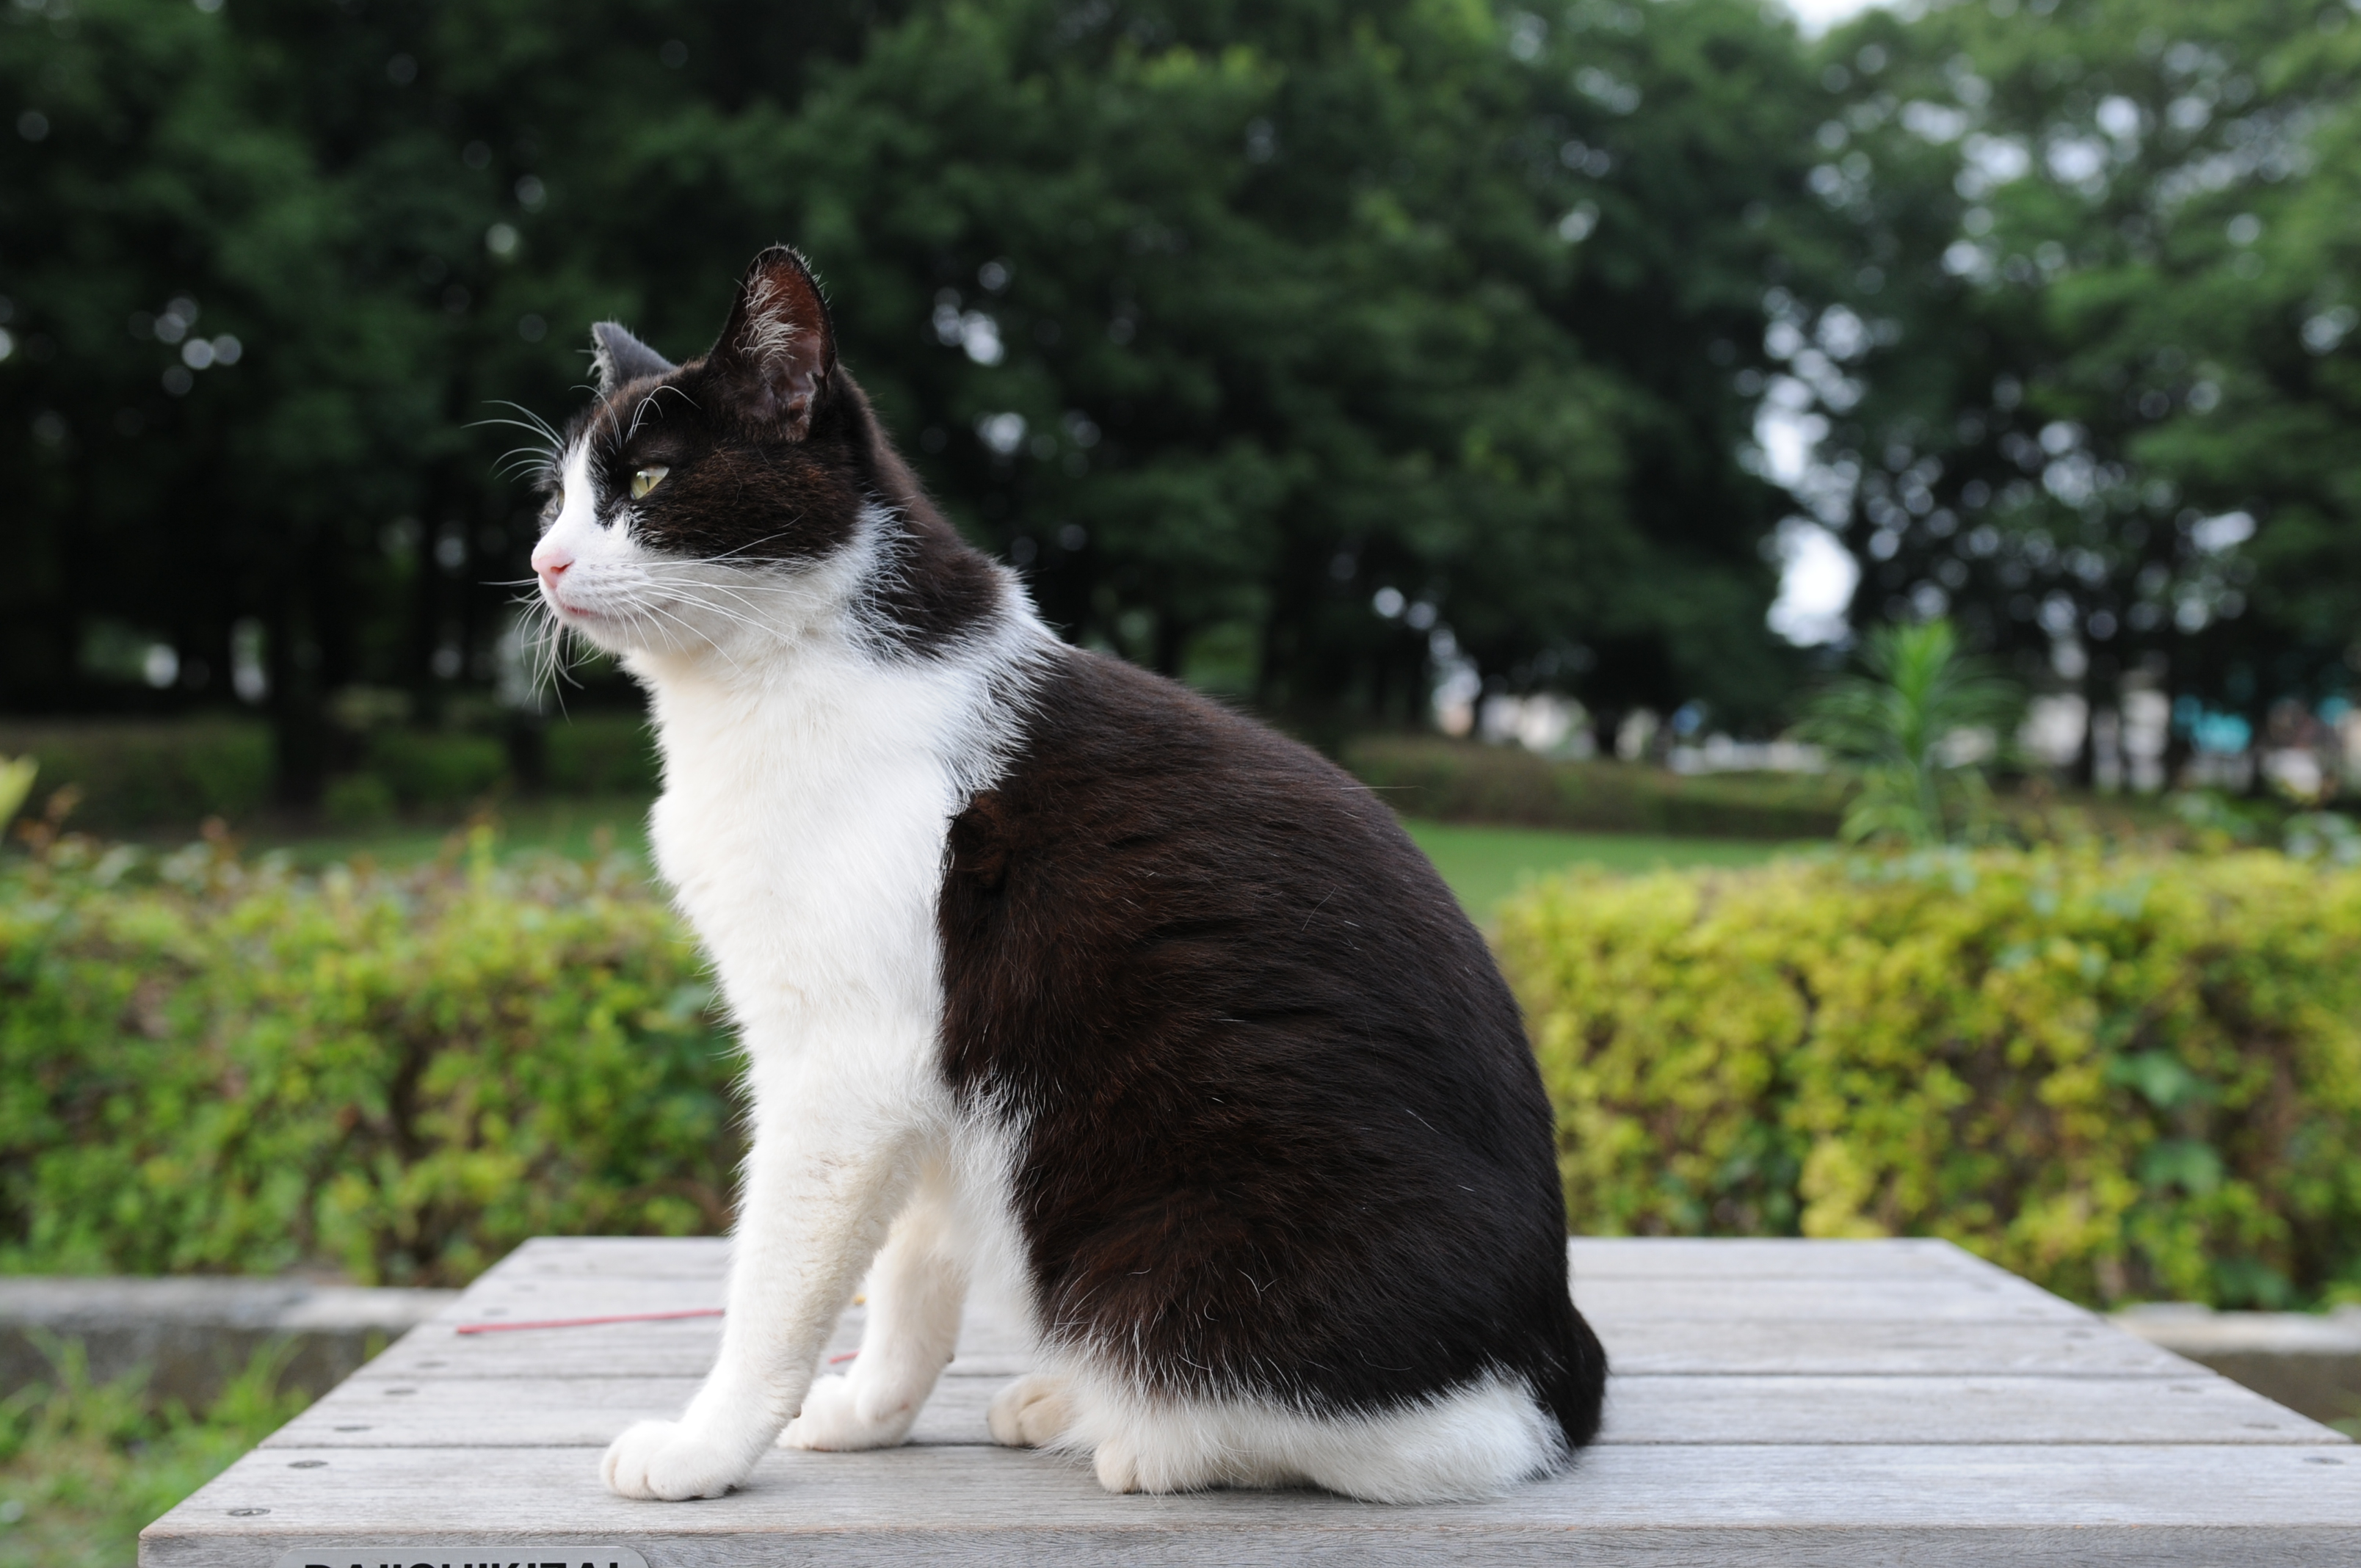 File:Black and white cat in a park-Hisashi-01.jpg - Wikimedia Commons